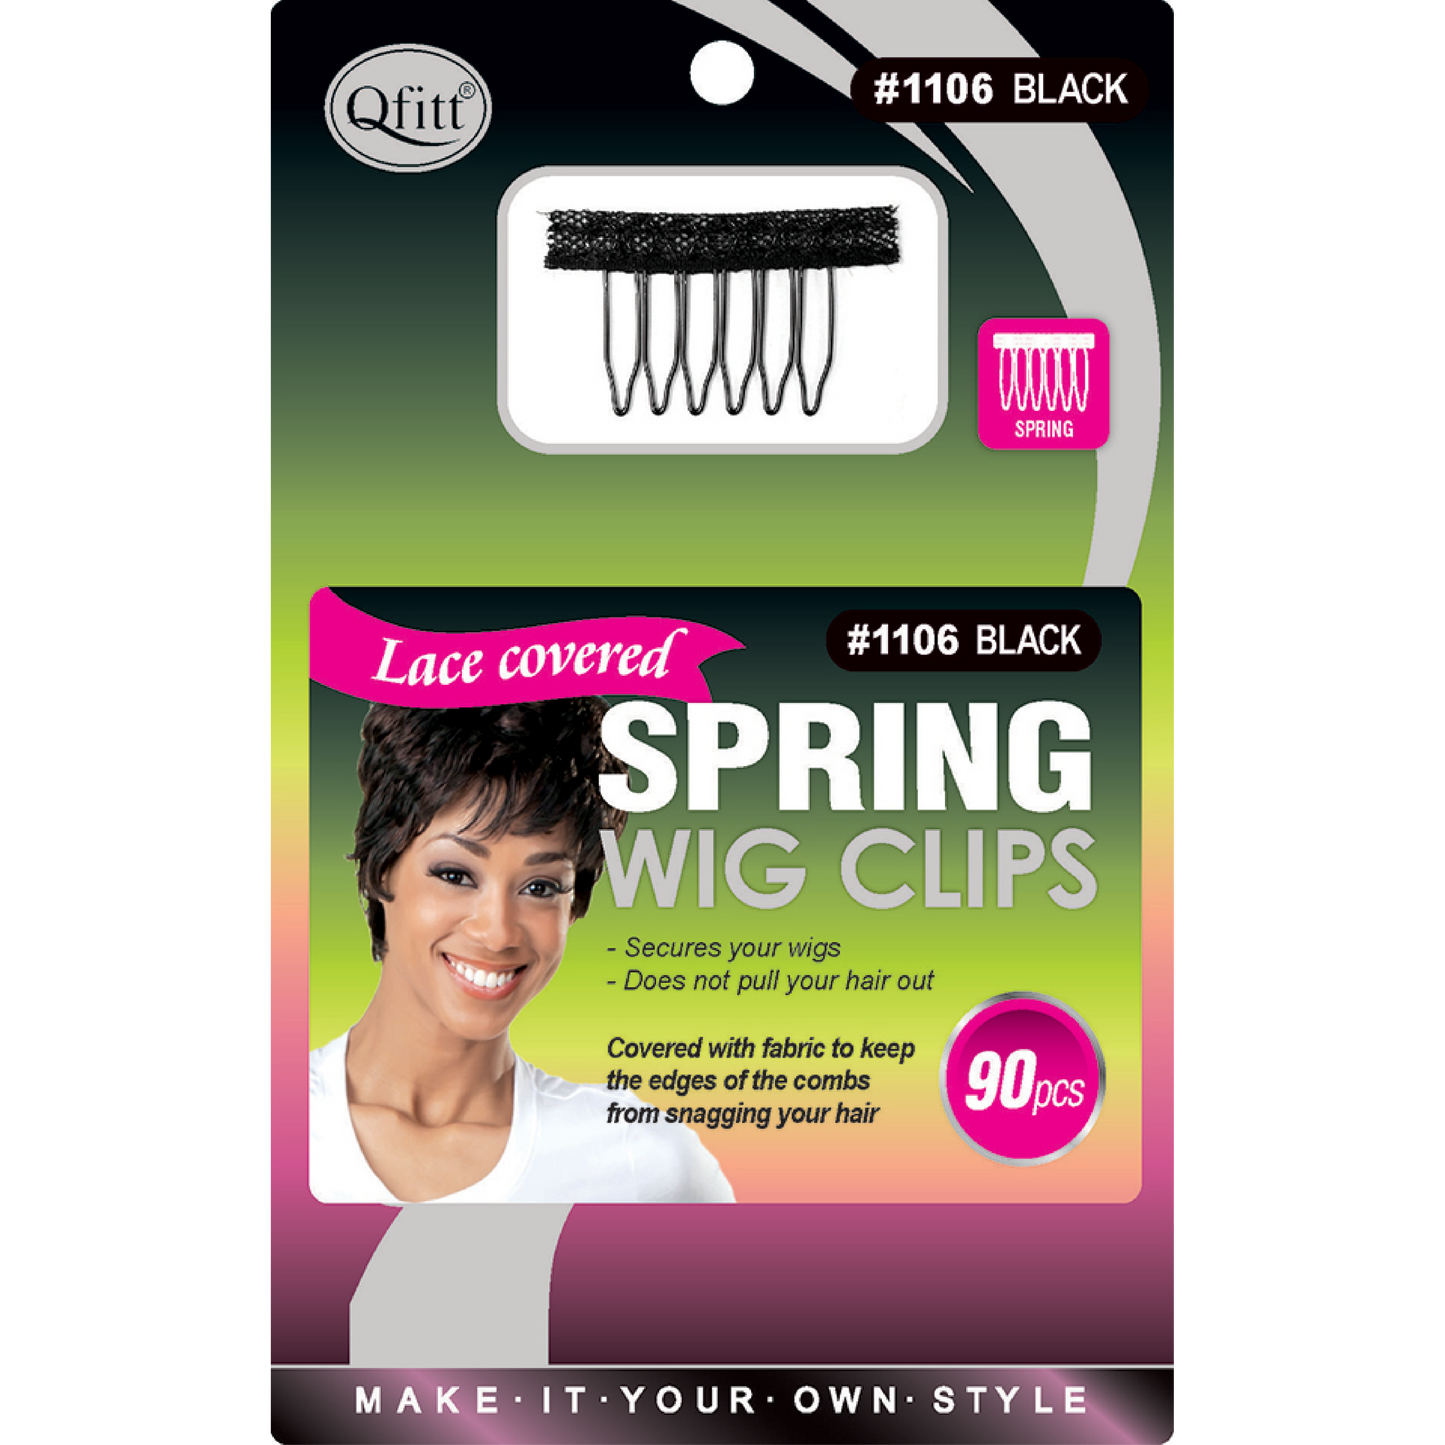 BULK BLISTER LACE COVERED SPRING WIG CLIPS - 90PCS